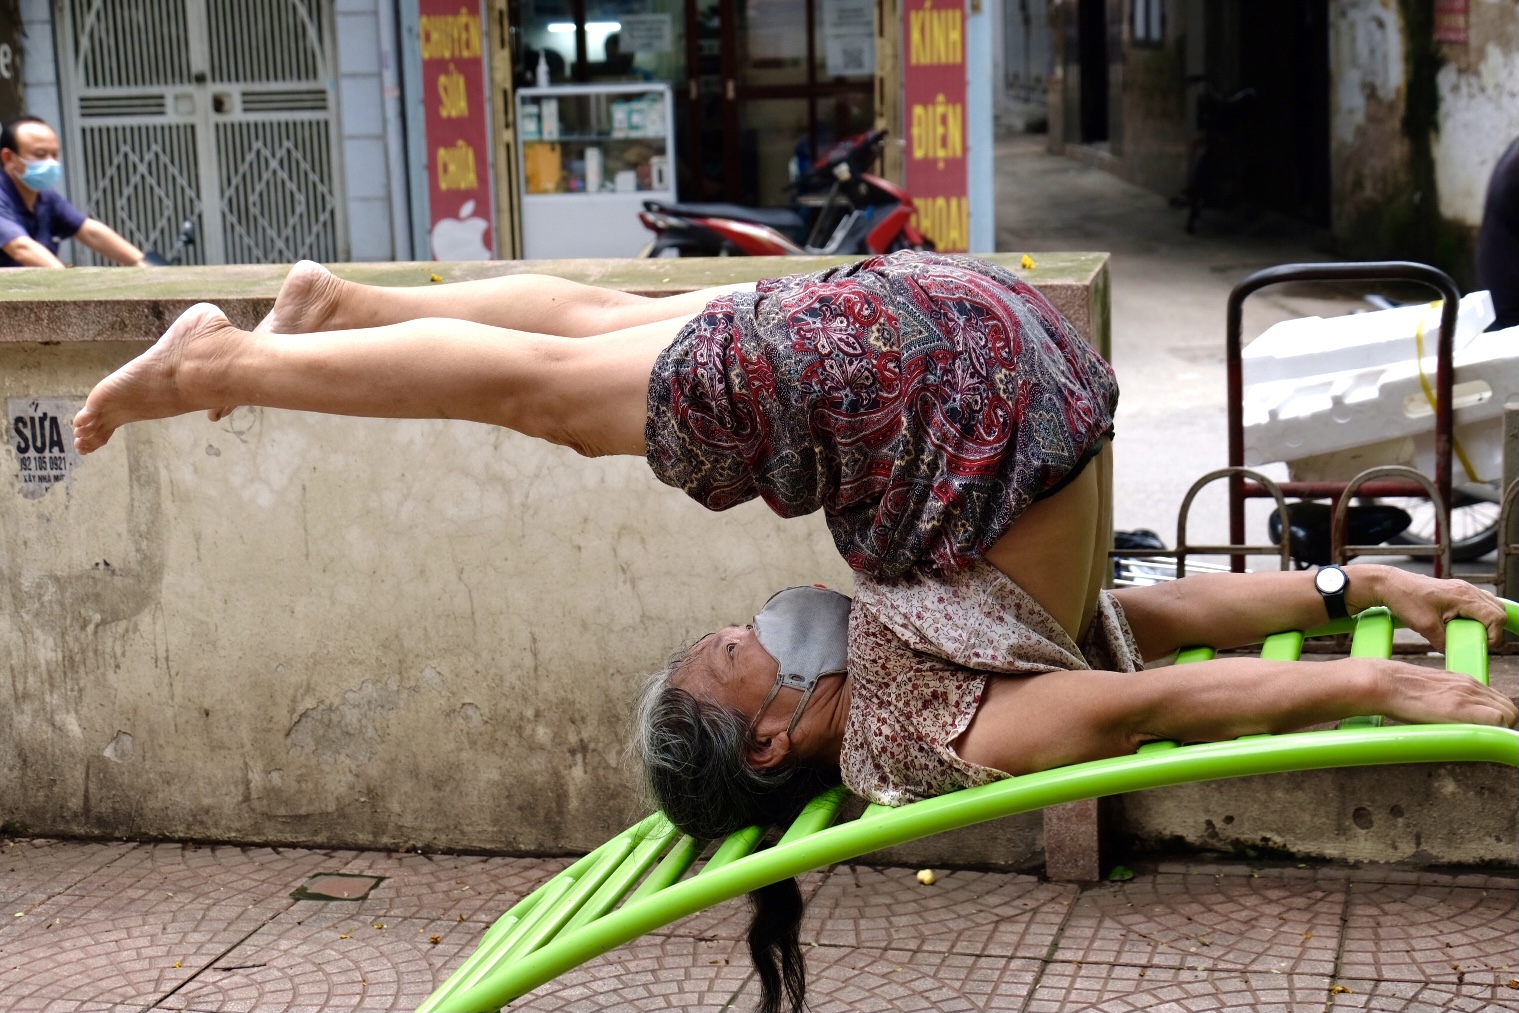 Le Thi Phong performs a body stretch at the E Yard on Van Chuong Street in Dong Da District, Hanoi. Photo: Nguyen Bao / Tuoi Tre